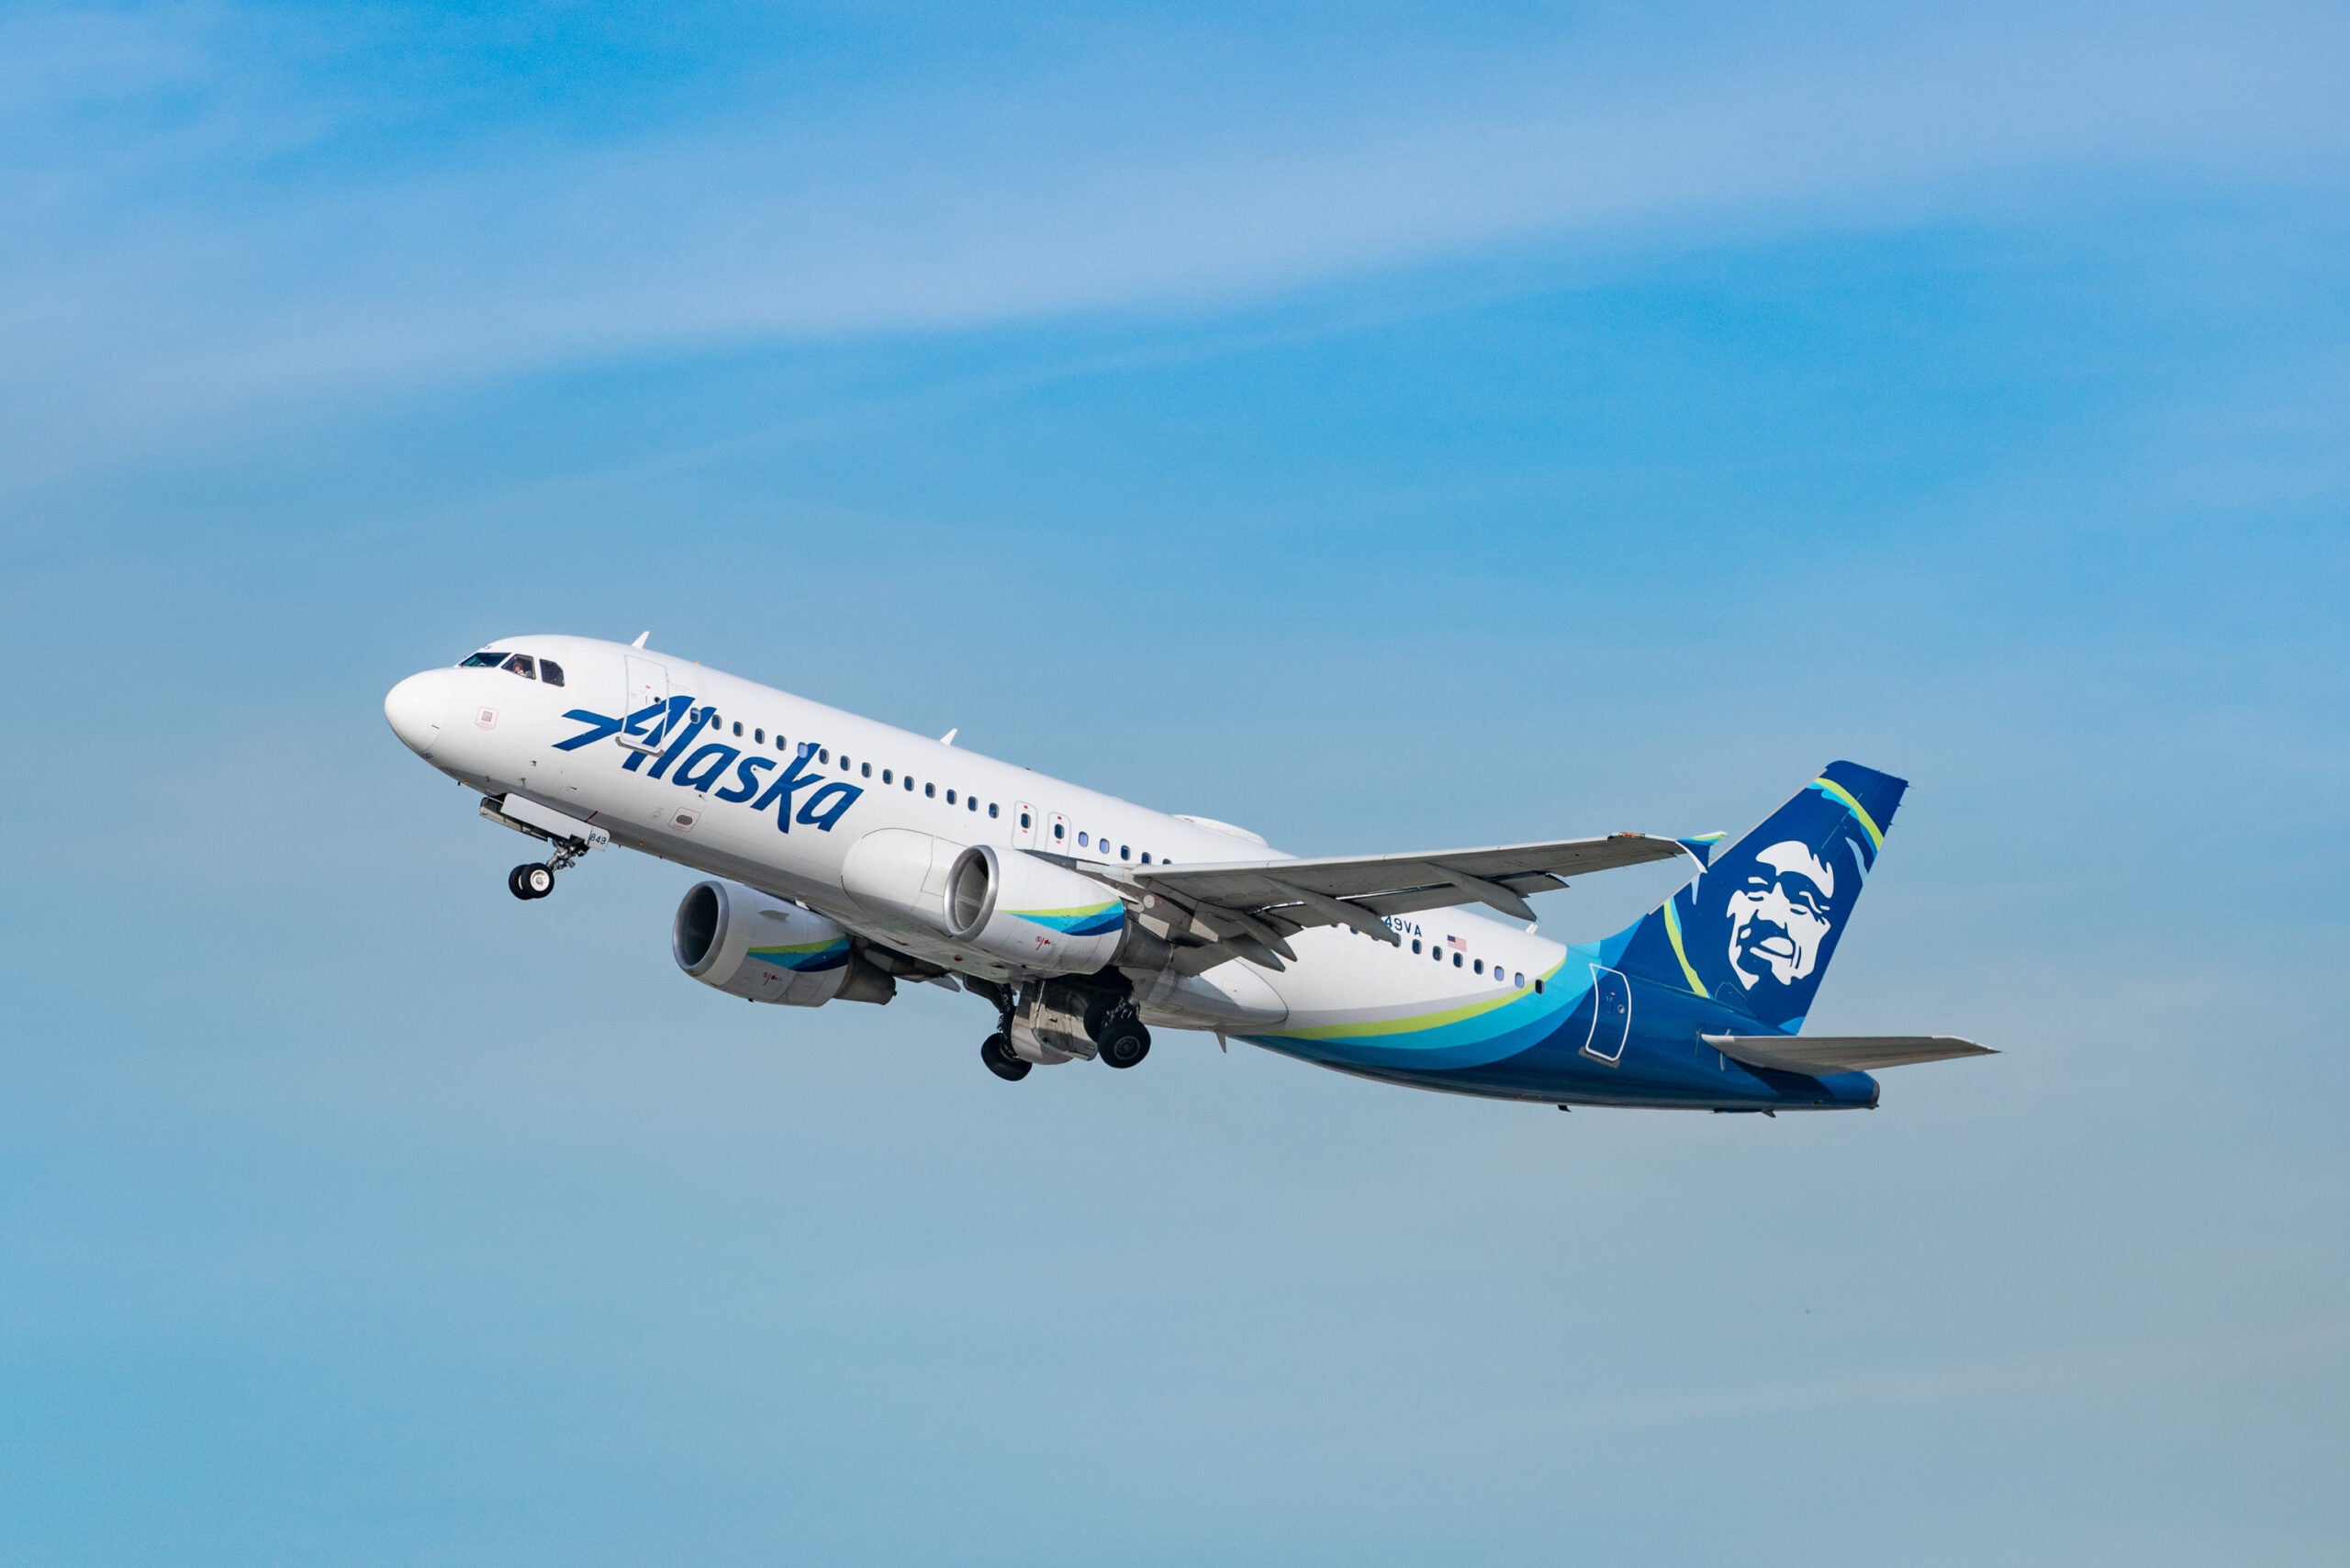 Alaska Airlines Airbus A320 taking off from LAX